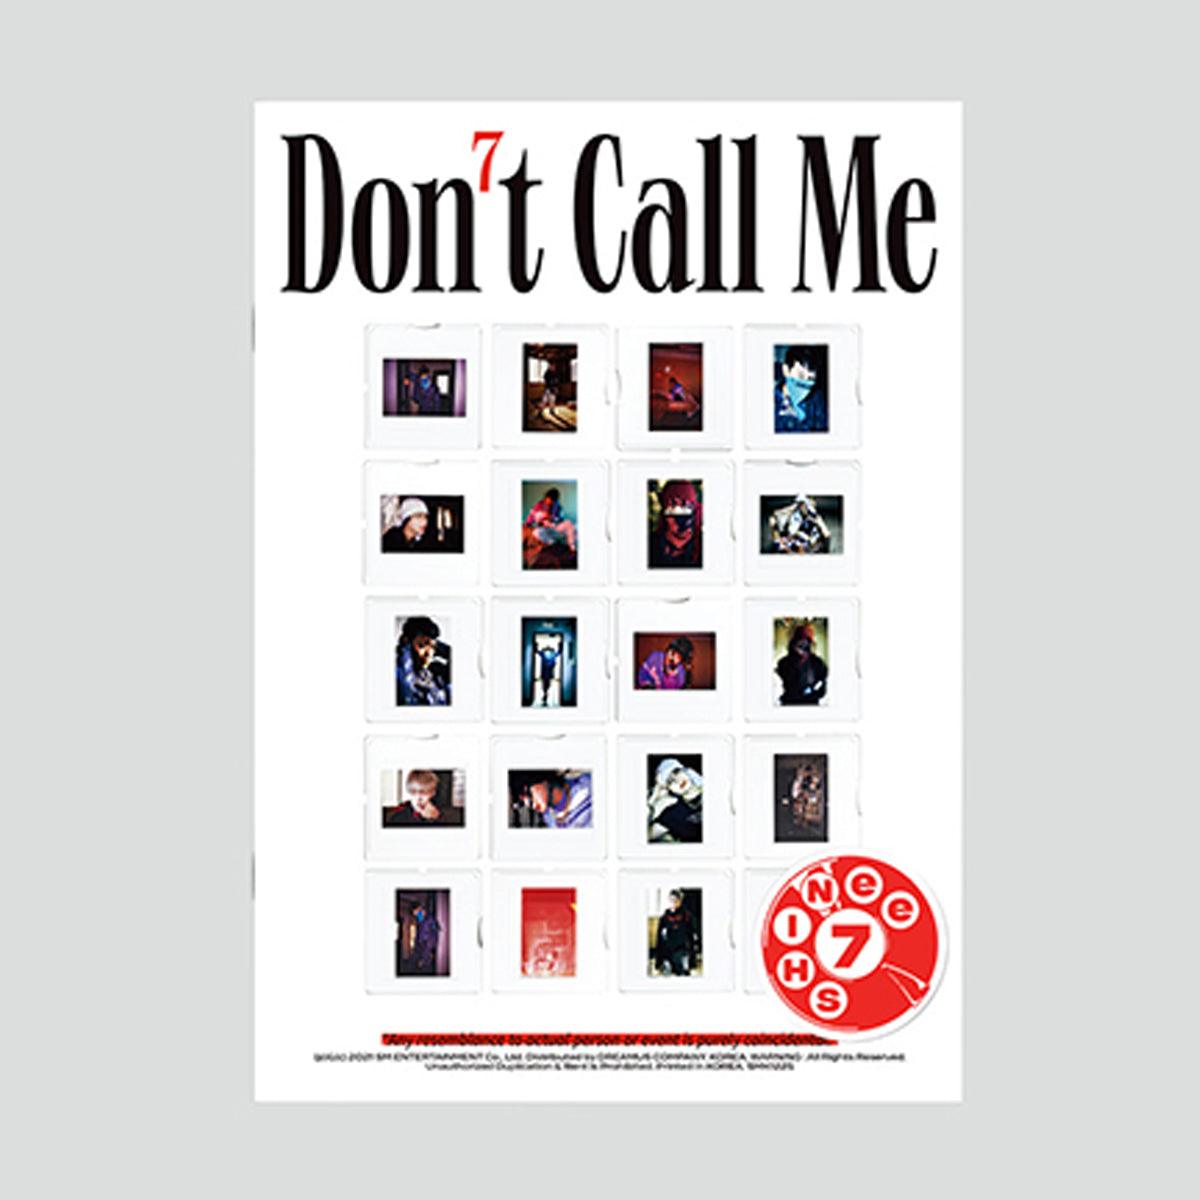 SHINEE 7TH ALBUM 'DON'T CALL ME' (PHOTOBOOK) REALITY VERSION COVER